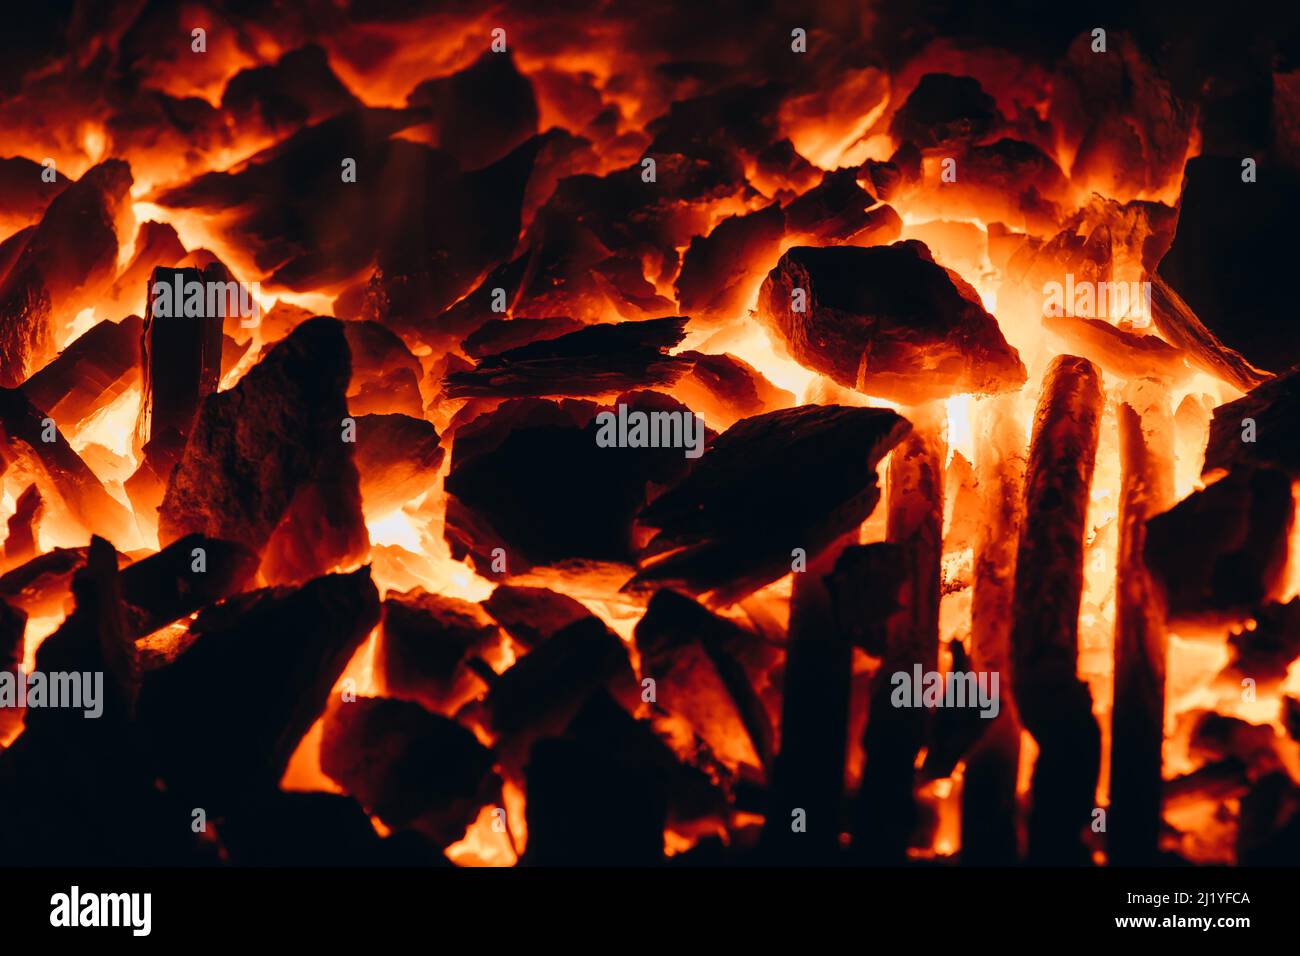 Abstract background of glowing coals in fireplace with fire flames. Burning flame background. Stock Photo